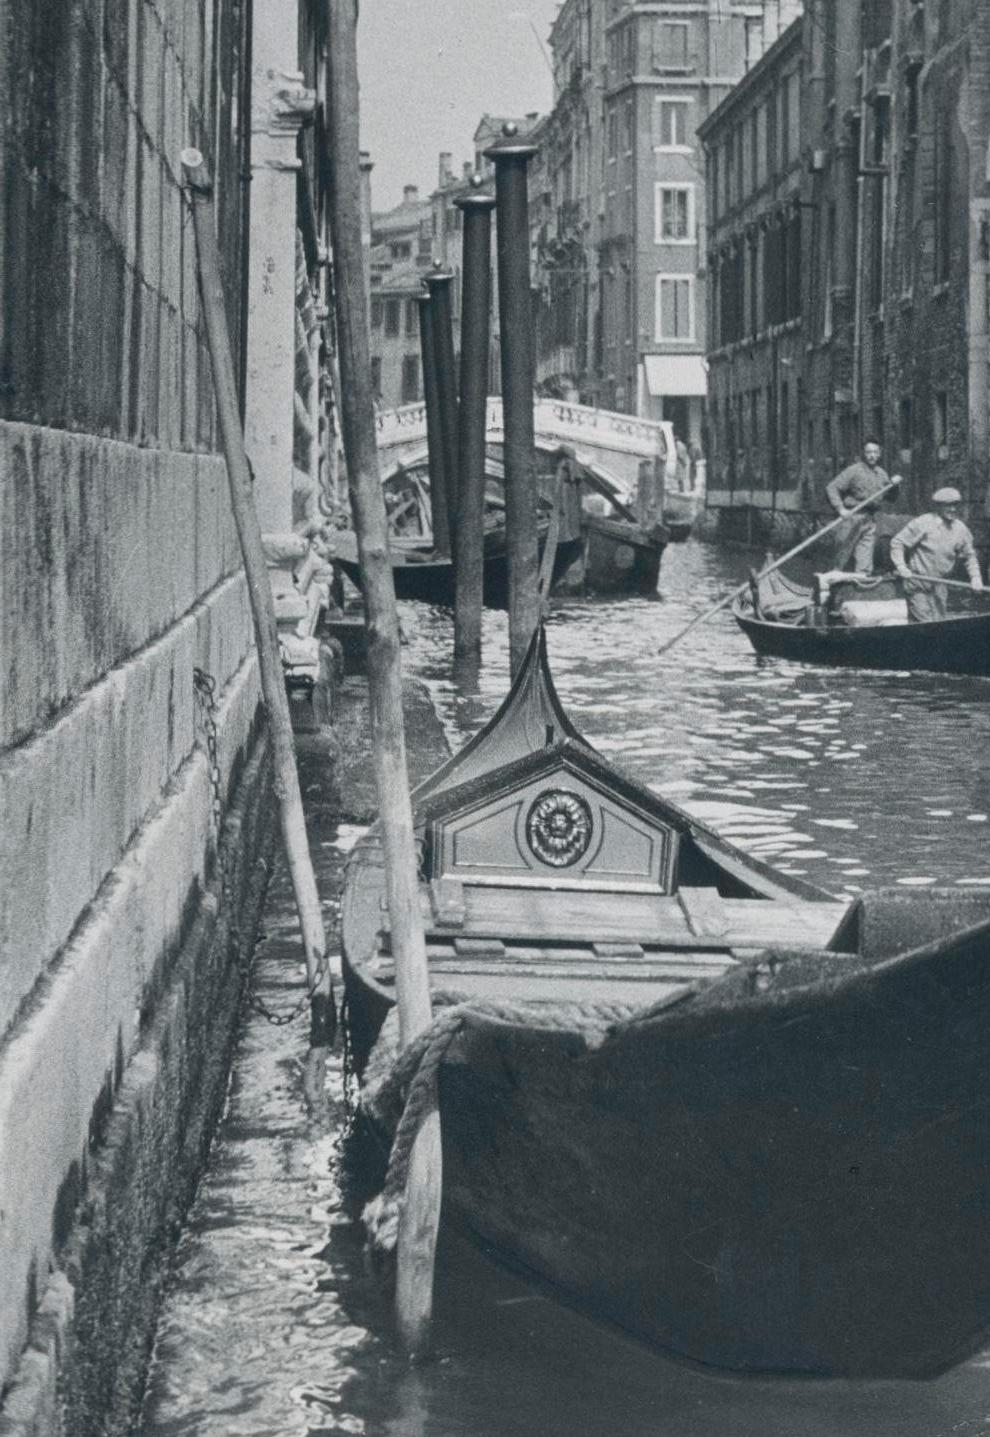 Venice - Gondola on Water and Bridge of Sights, Italy, 1950s, 23, 3 x 15, 9 cm - Photograph by Erich Andres